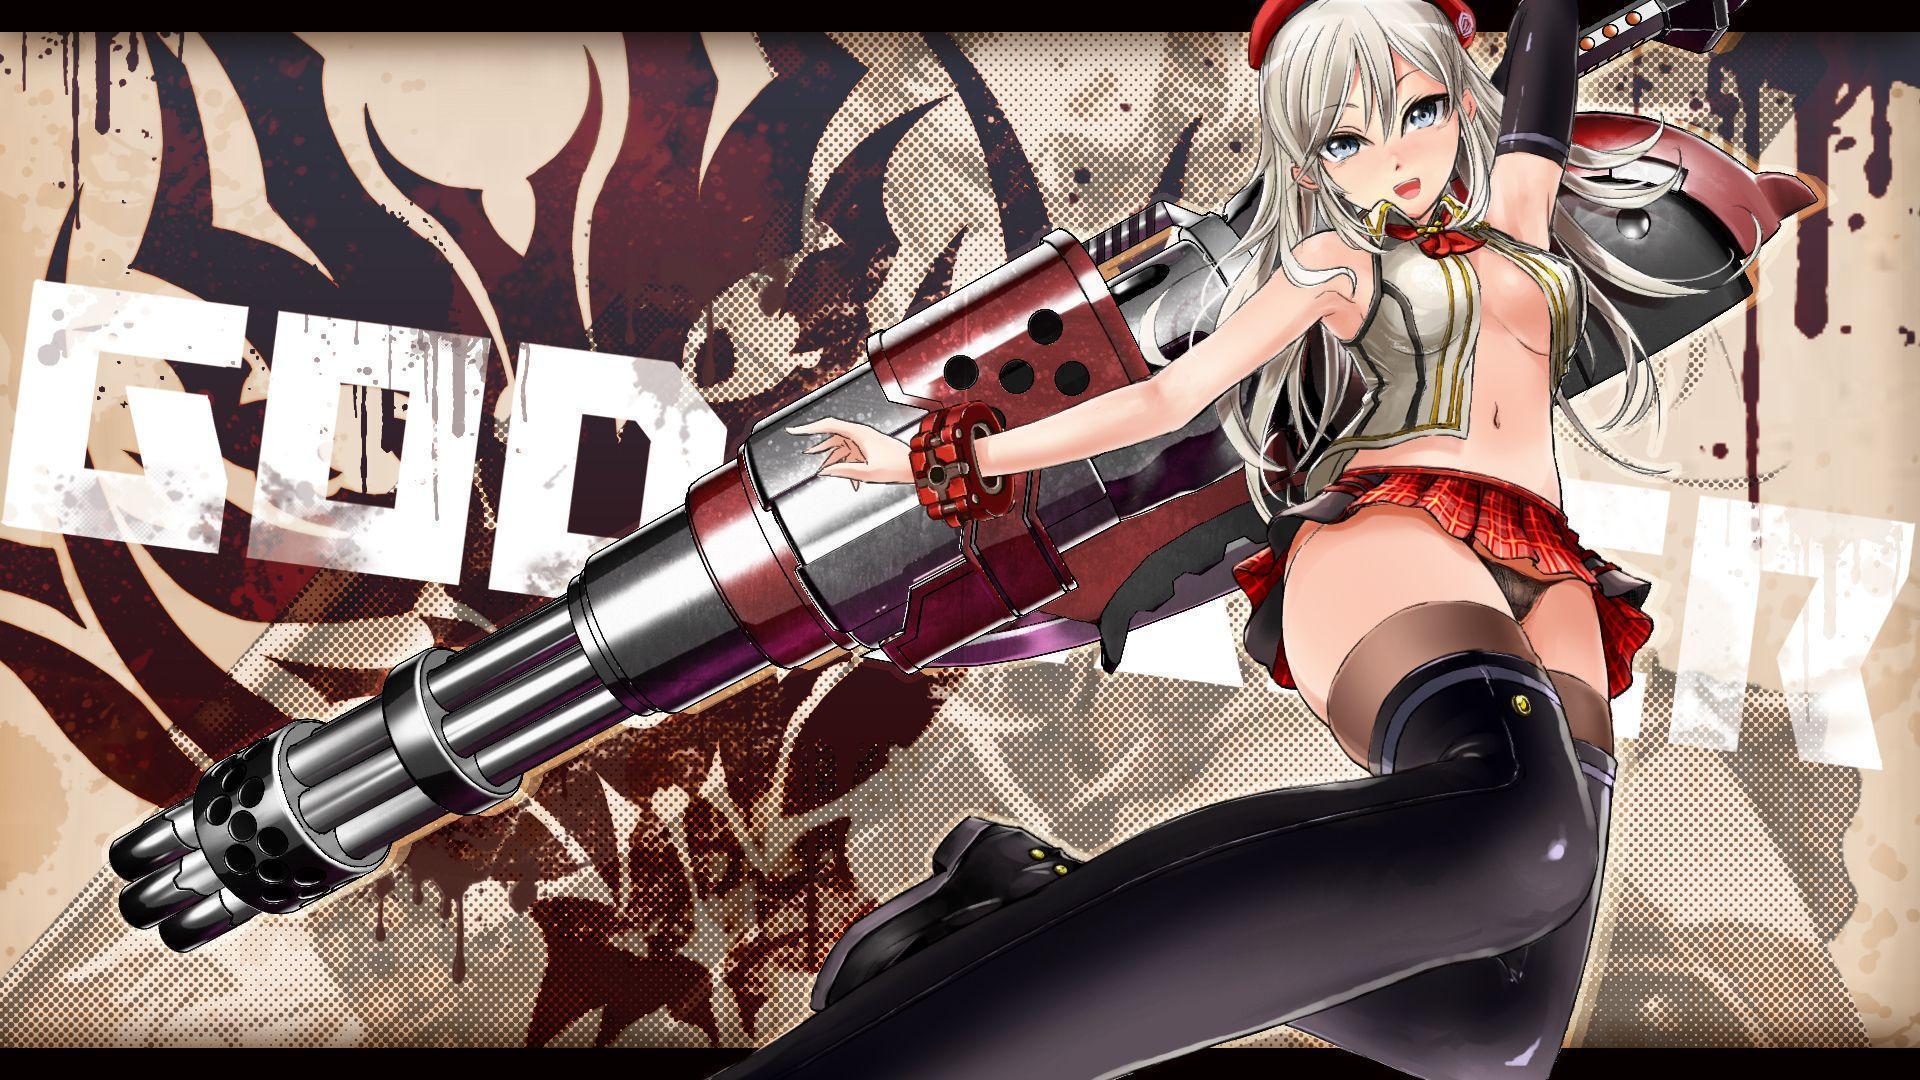 God Eater Wallpapers Download.